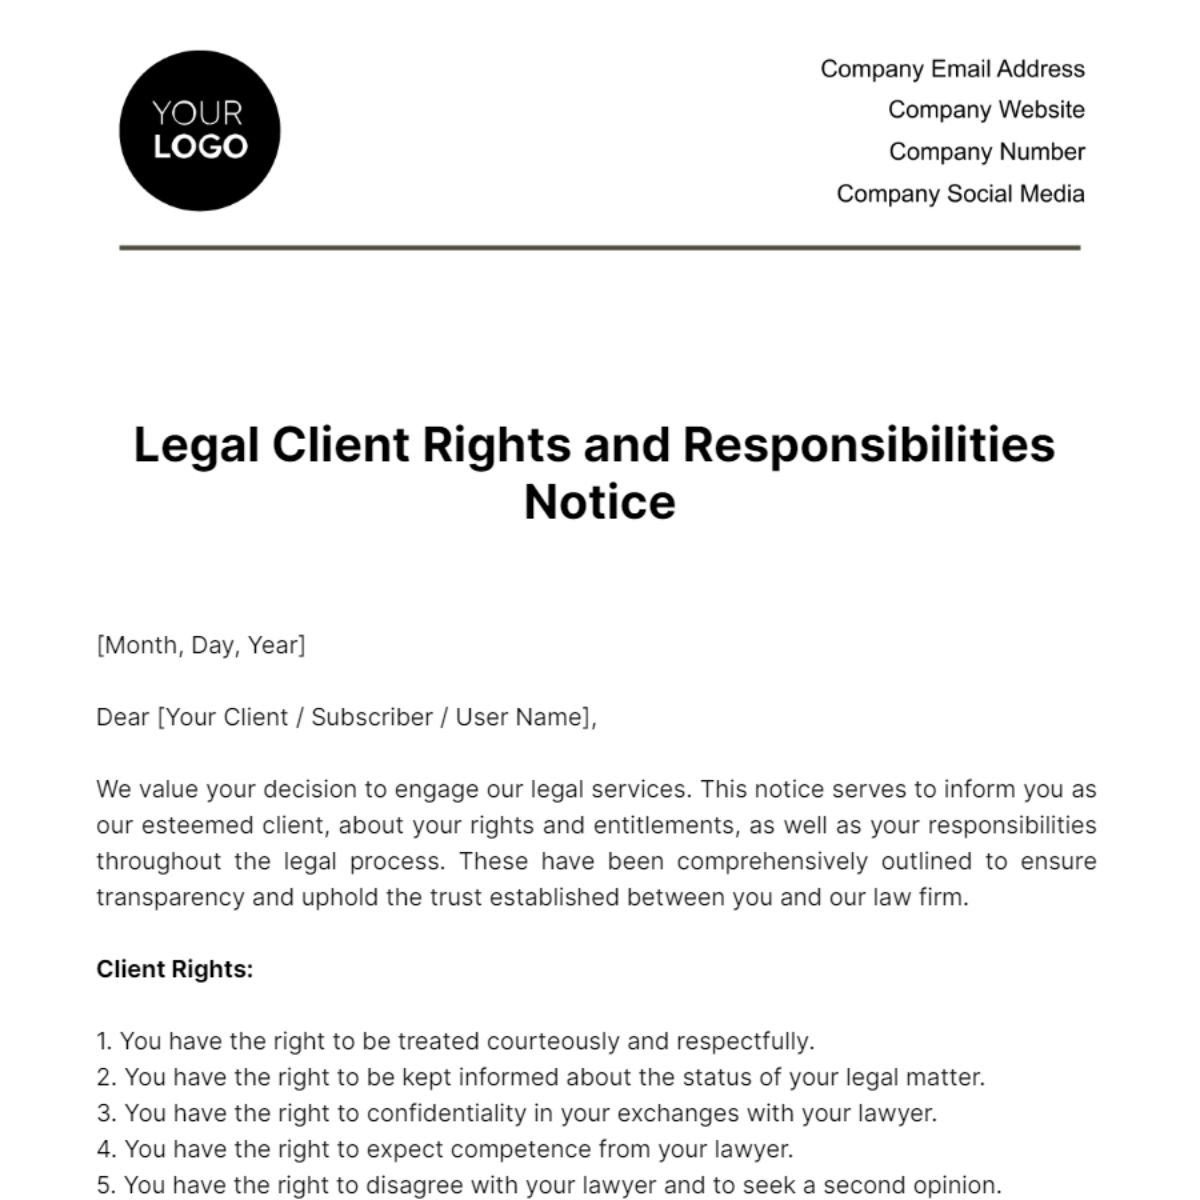 Legal Client Rights and Responsibilities Notice Template